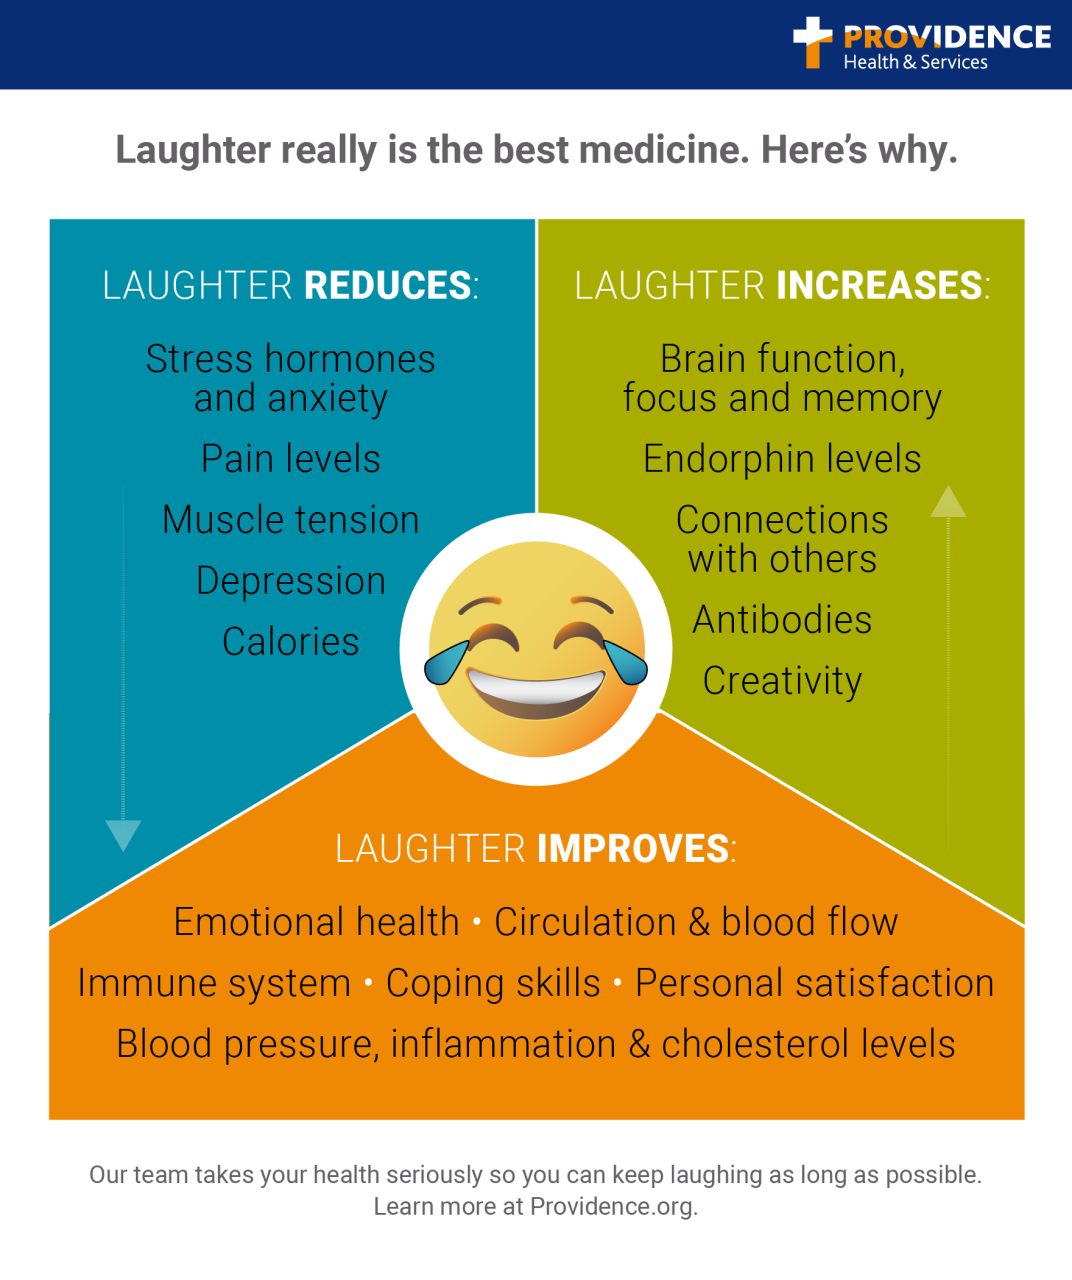 Can Laughter Help You Live Longer?